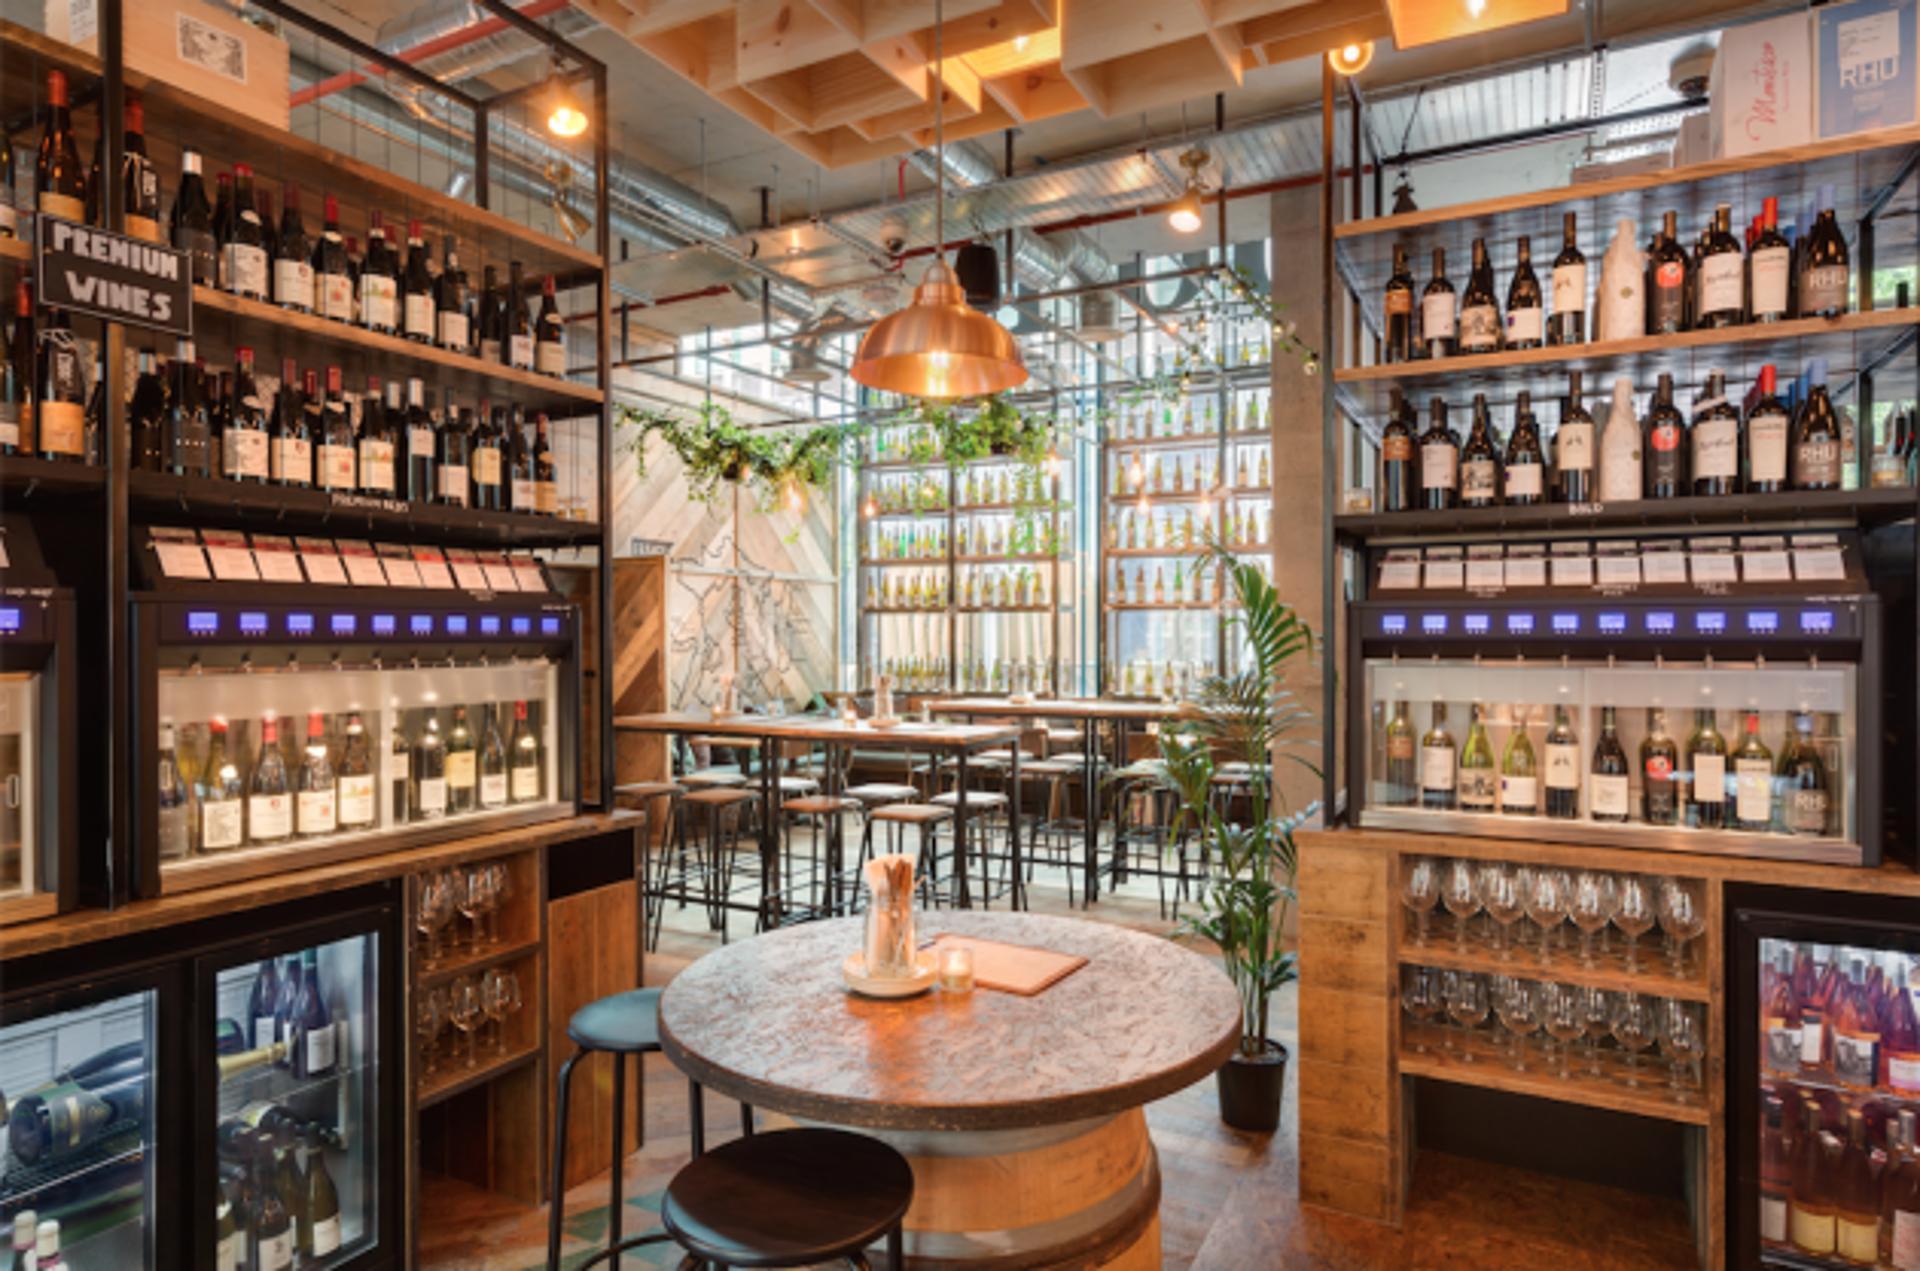 Majestic acquires wine bar chain out of administration